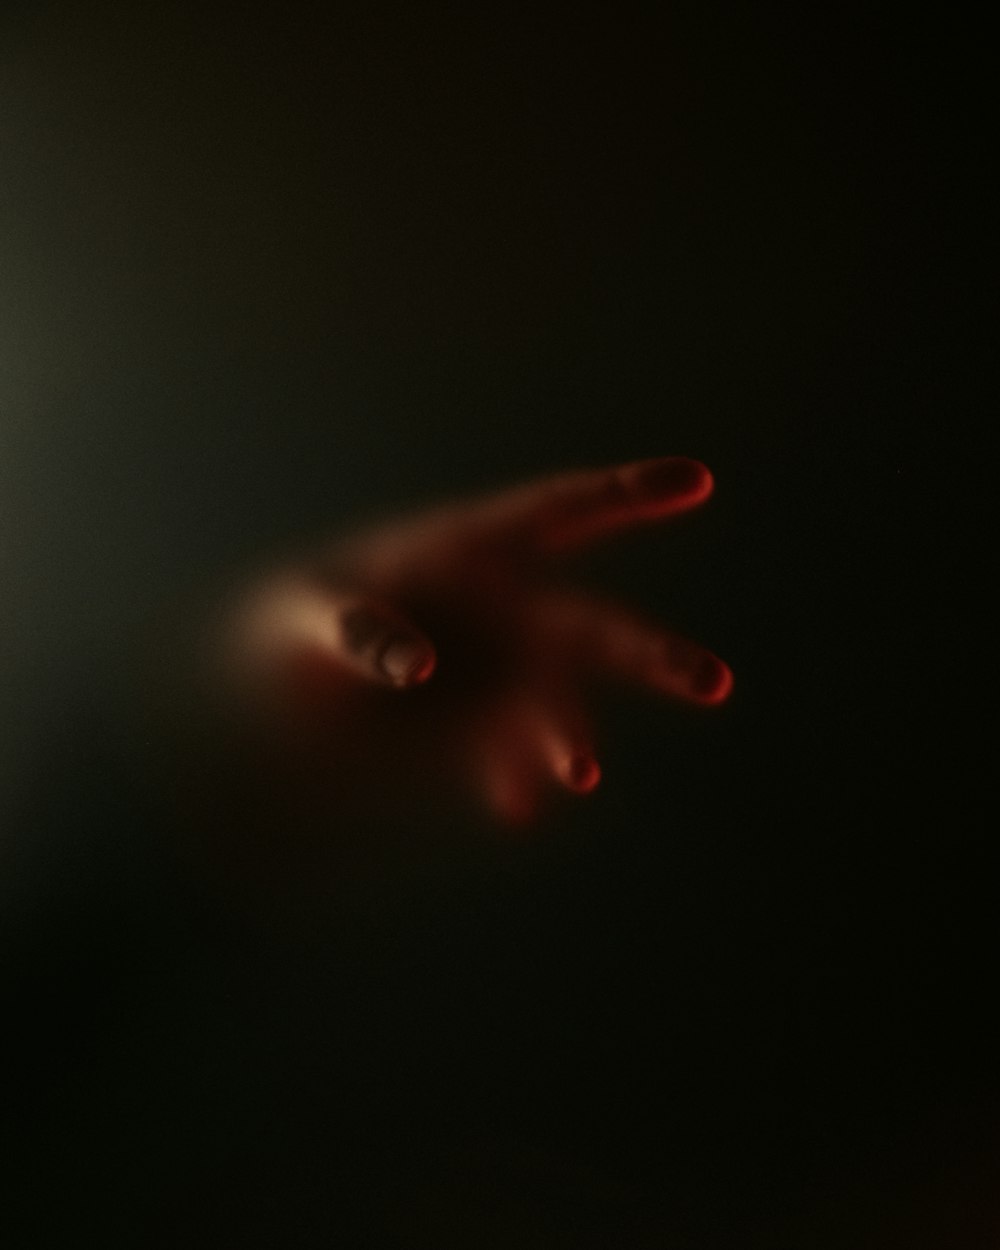 a blurry image of a person's hand in the dark